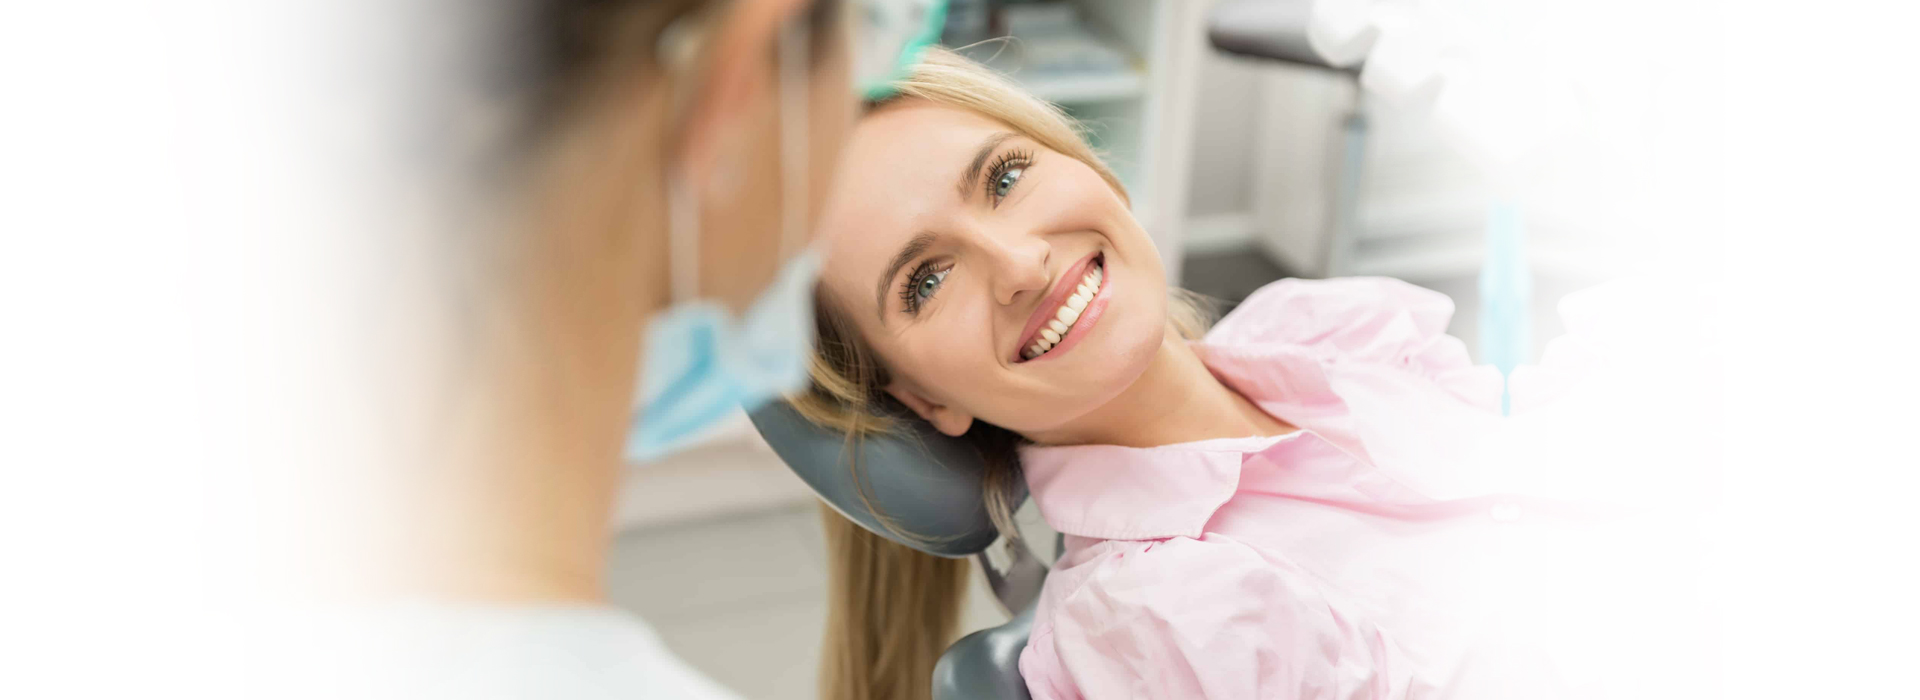 A Root Canal Can Stop Tooth Decay and Save Your Tooth